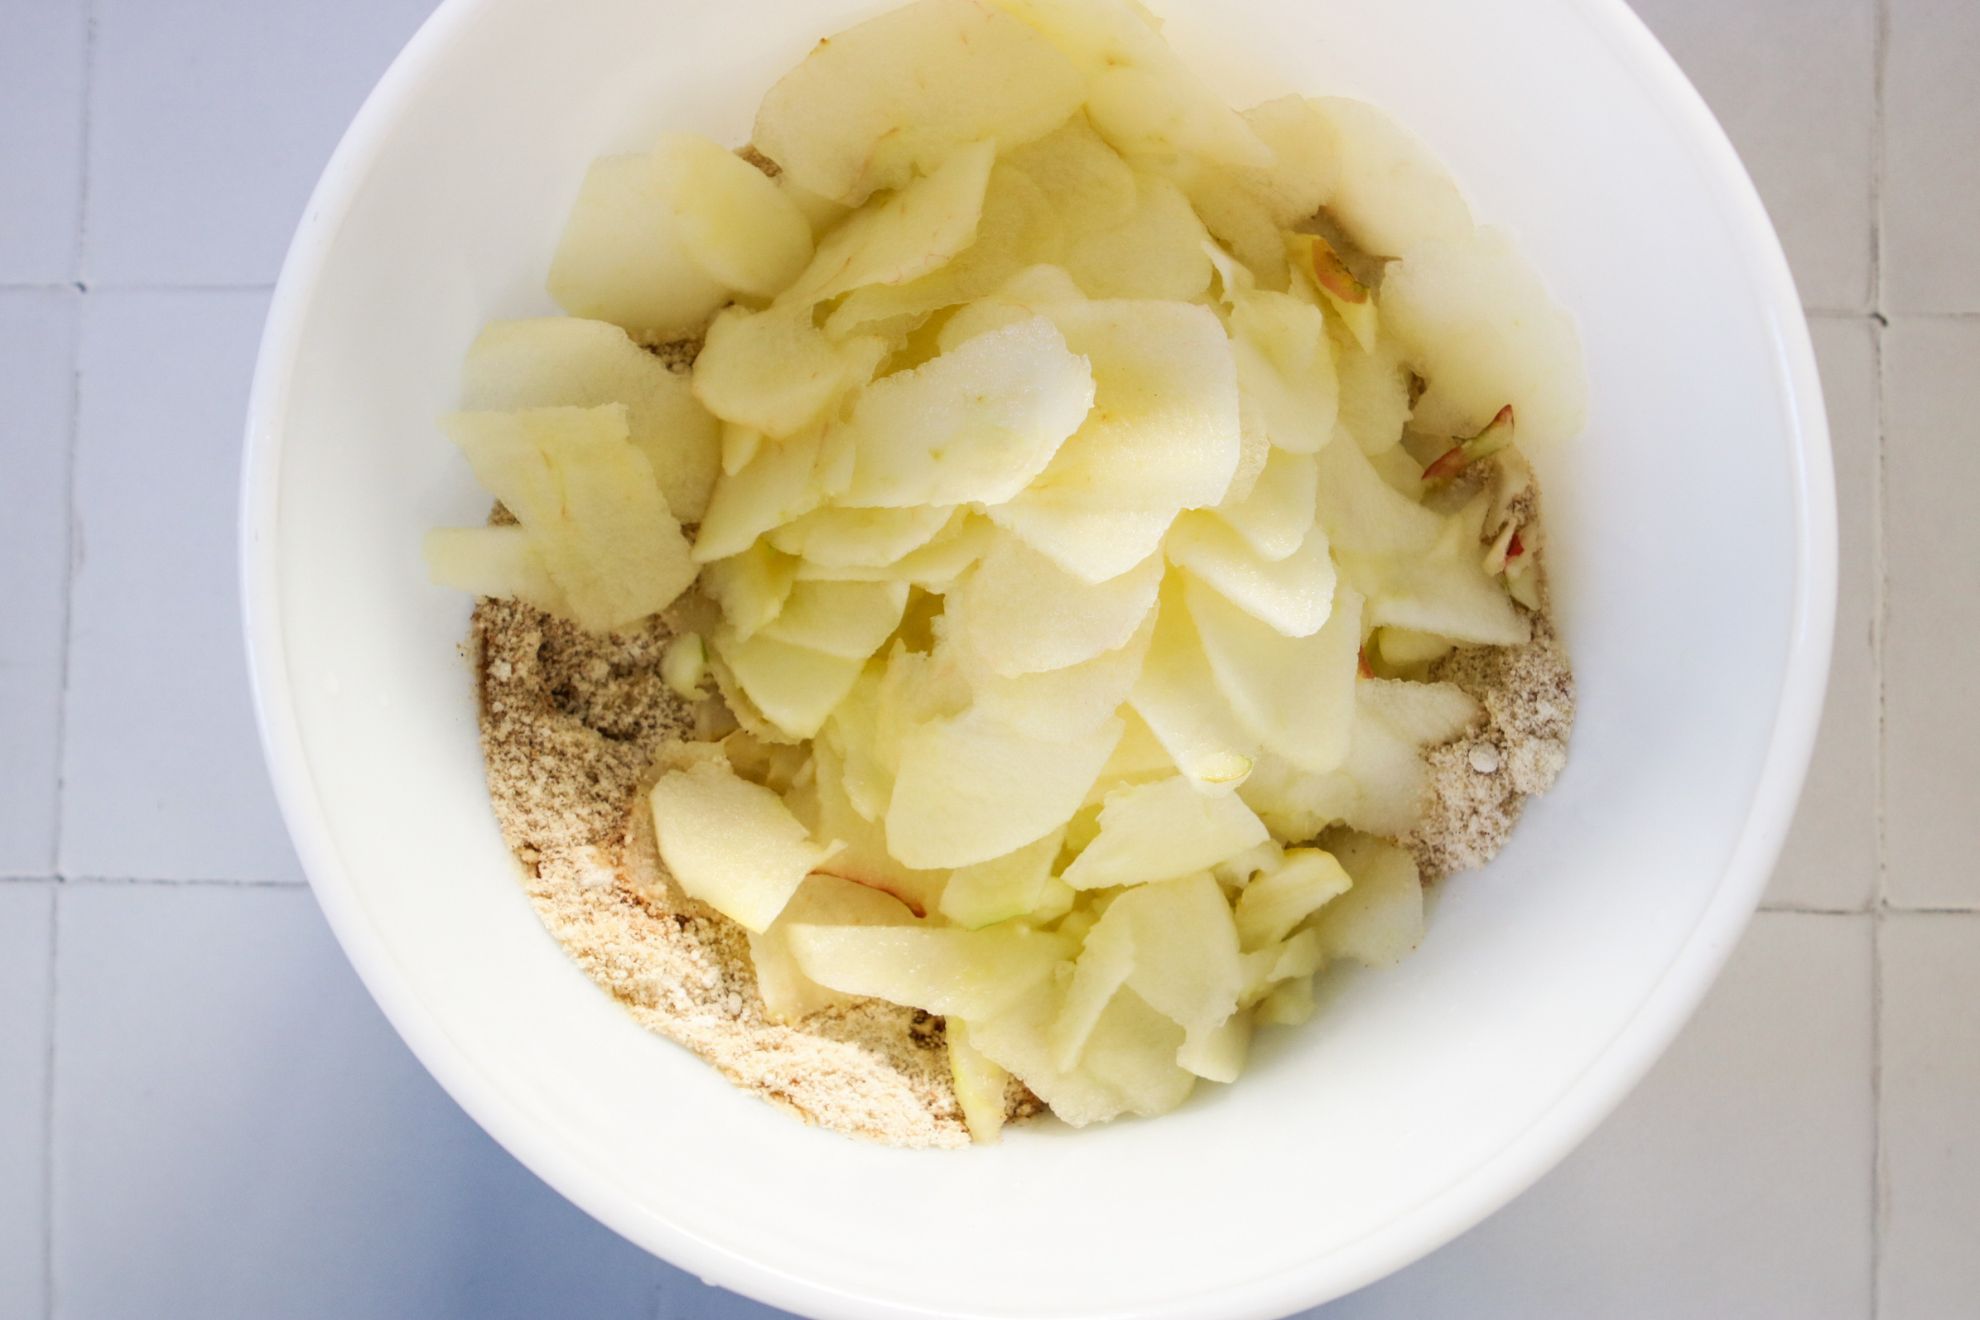 This is an overhead horizontal image of a large white bowl on a white square tile counter. In the bowl are a mix of dry ingredients with sliced apples on top.